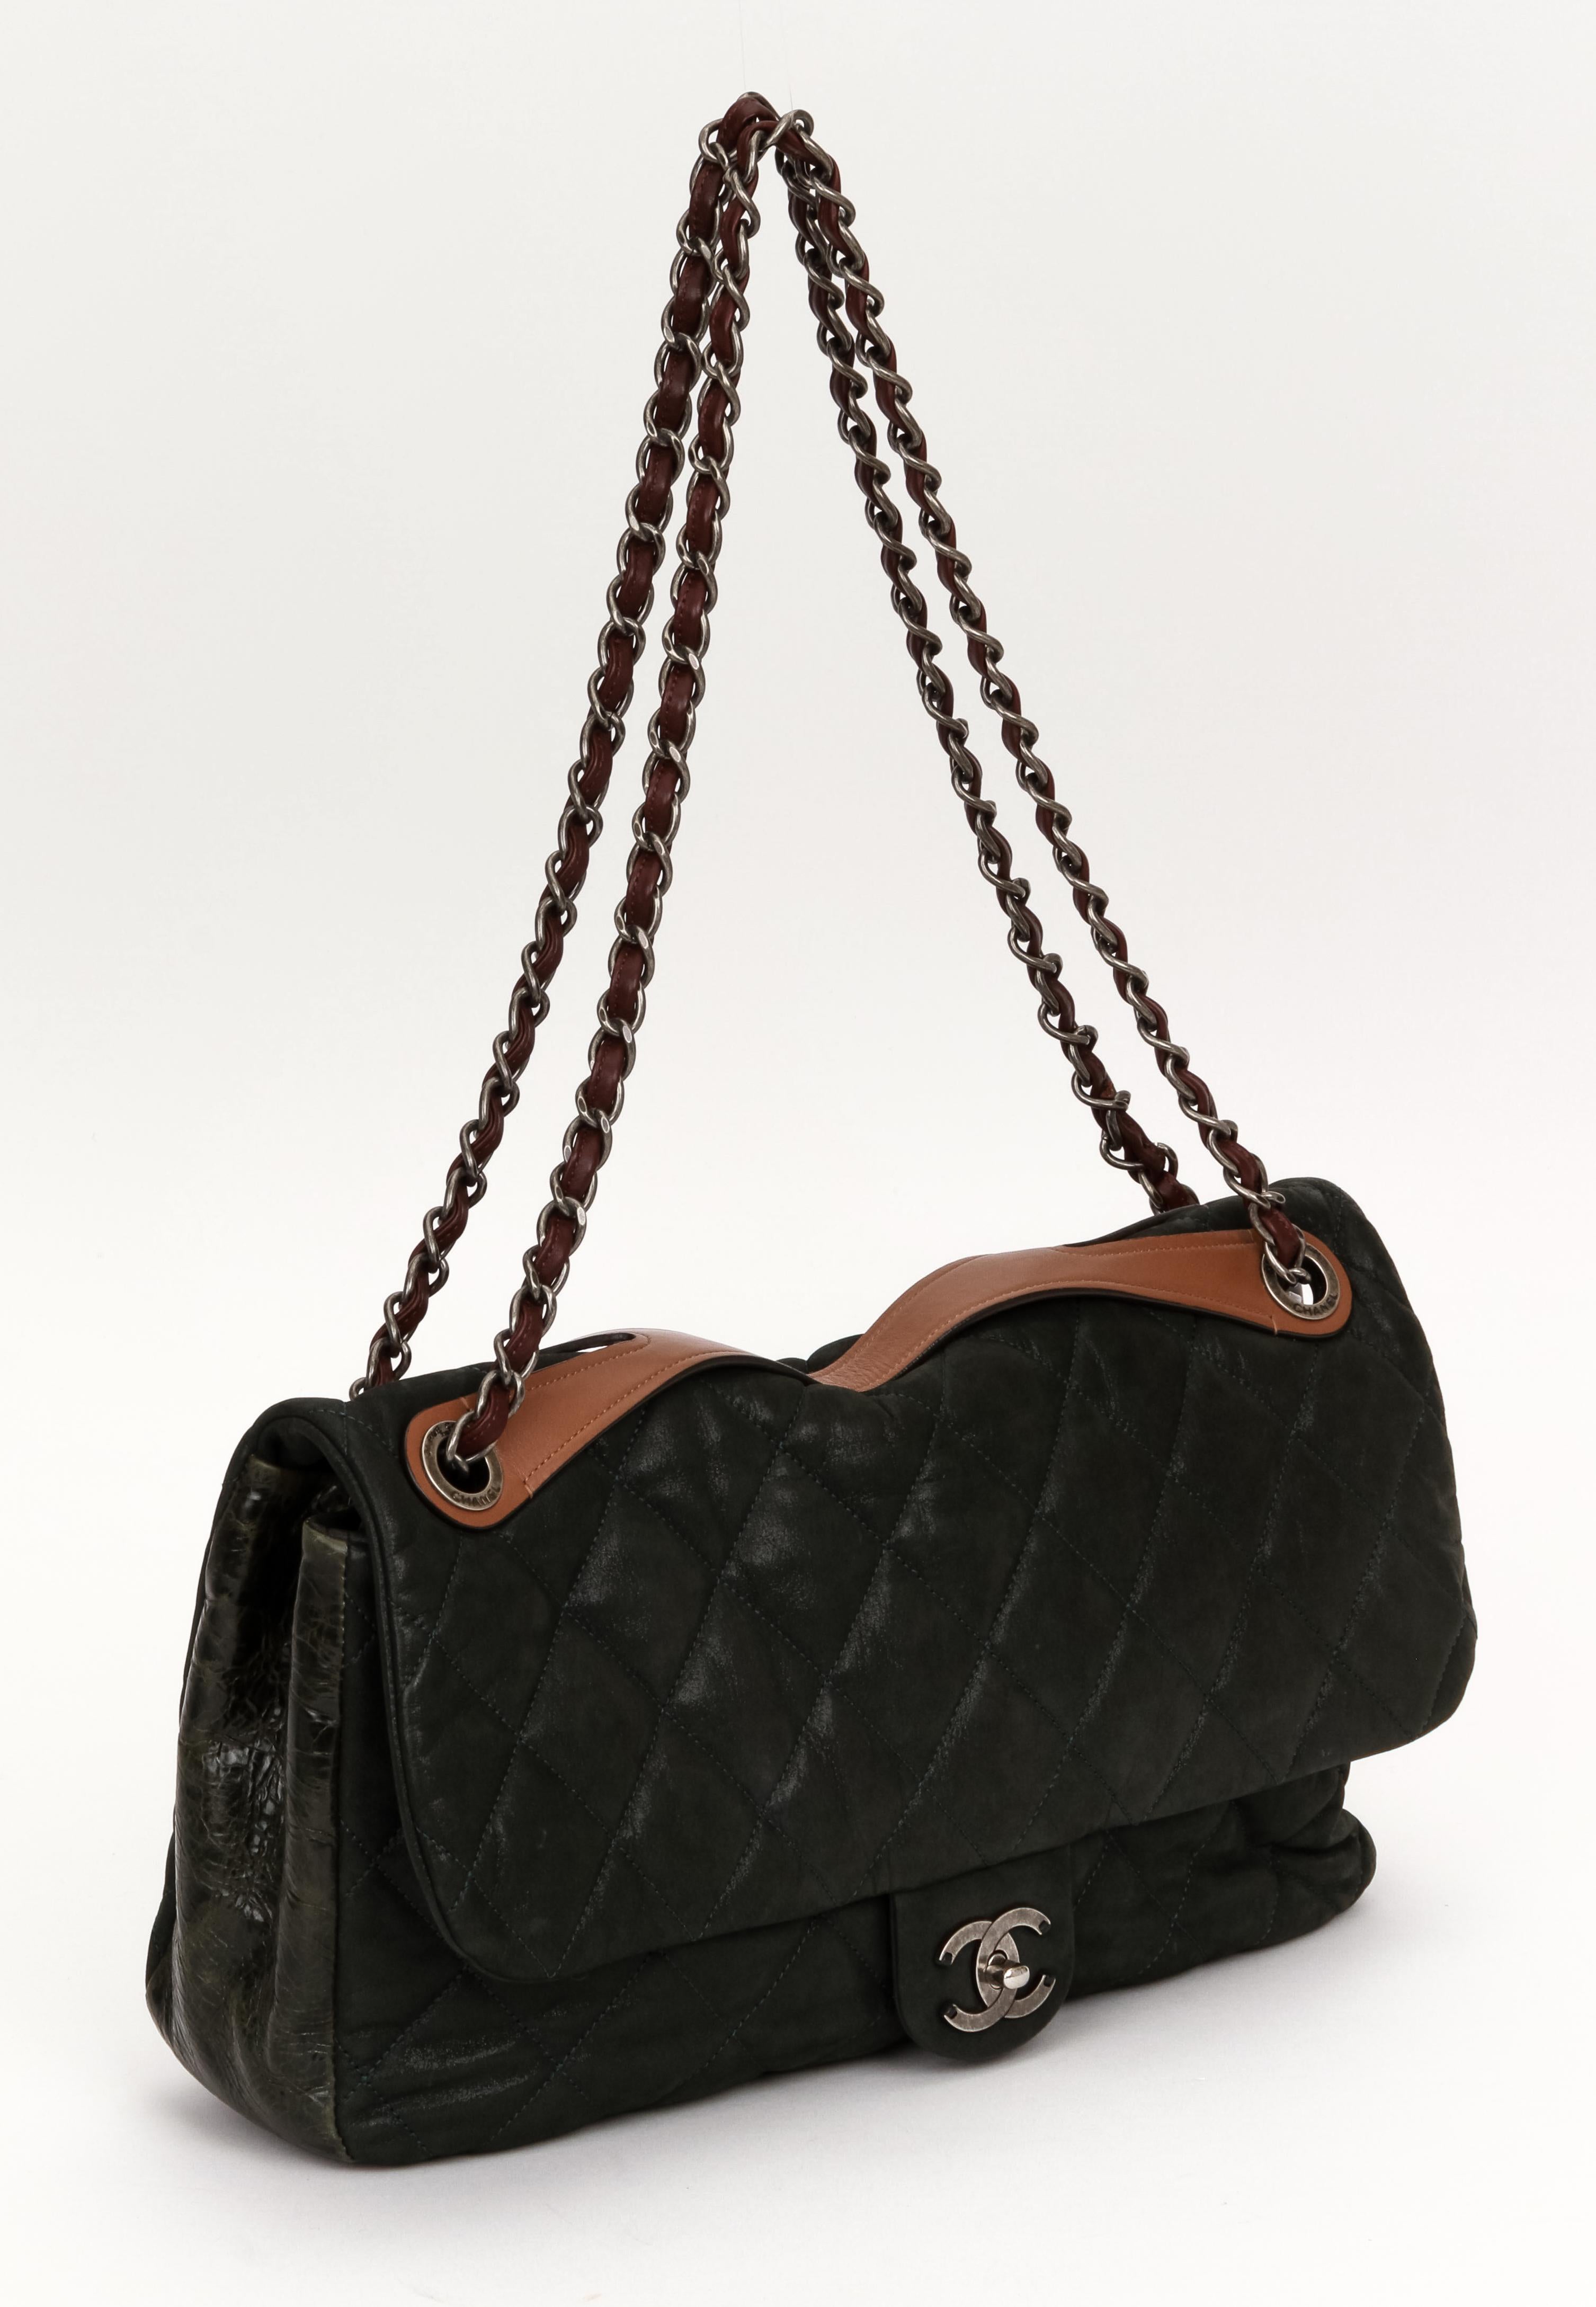 Chanel maxi single flap in combined glazed and cracked leather. Brown contrast handle, ruthenium hardware chain with burgundy woven leather. Shoulder drop 12